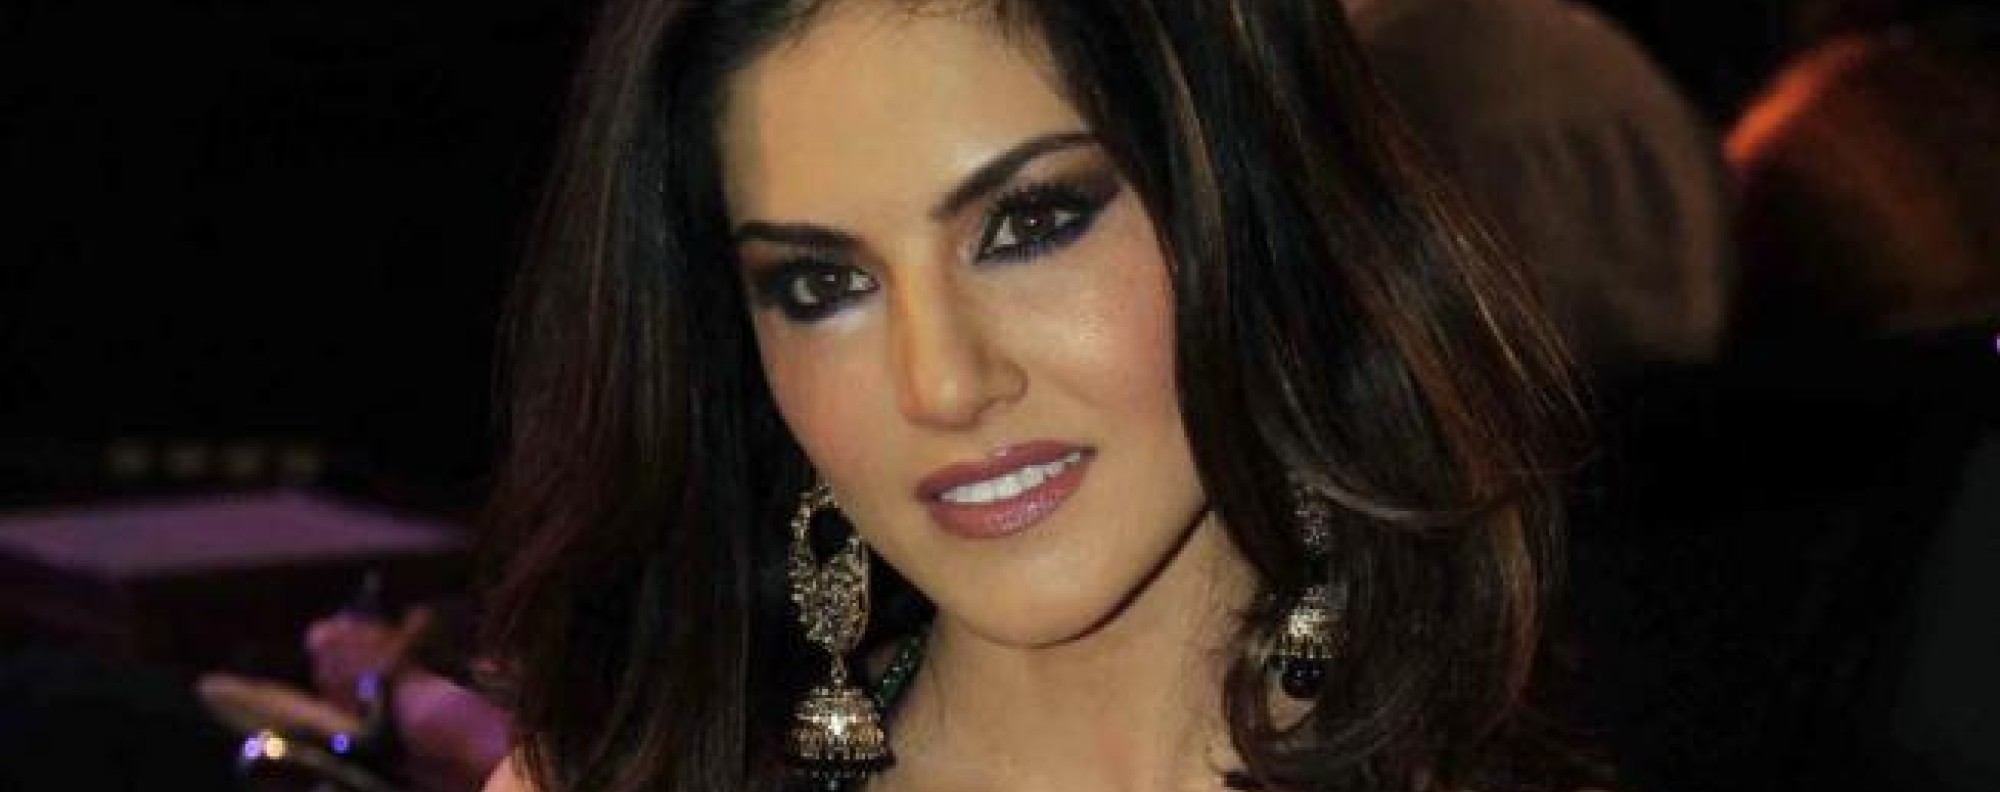 Sueny Loene Sex Viedo Rape - Rape crisis in India leads to calls for porn star Sunny Leone to be jailed  | South China Morning Post